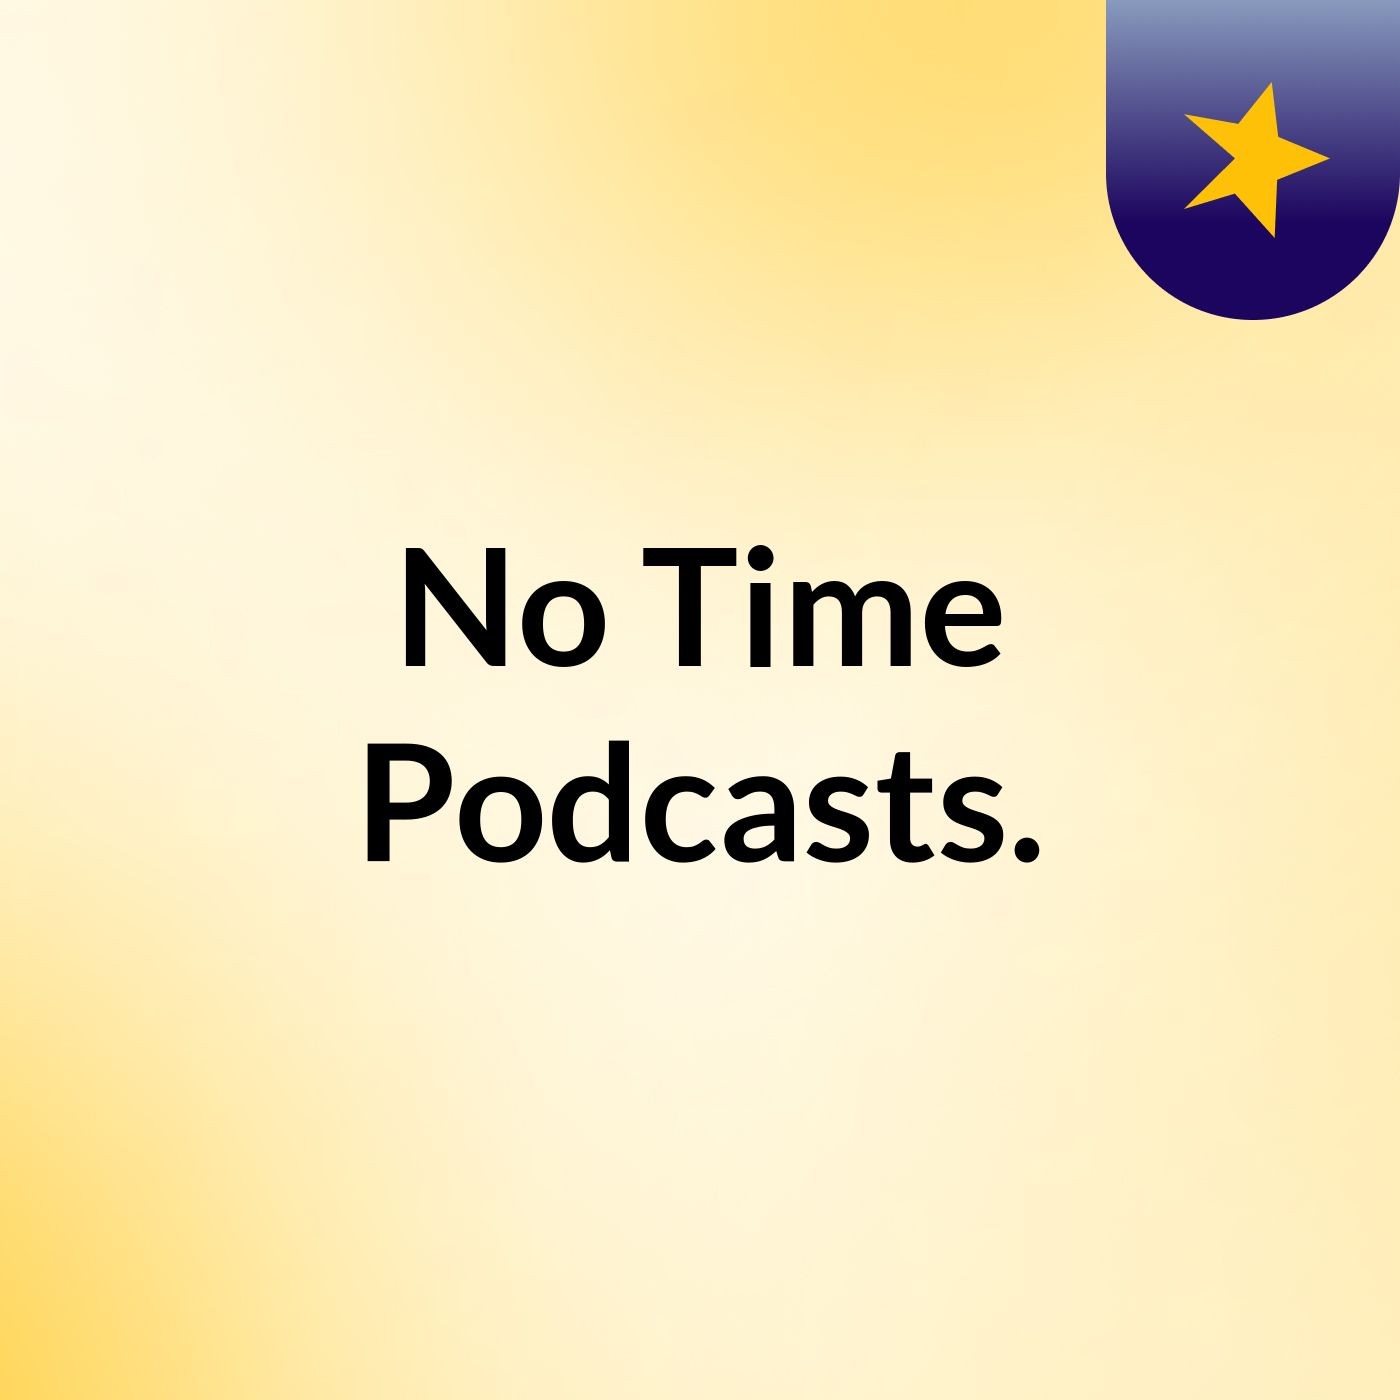 No Time Podcasts: Transformation of us